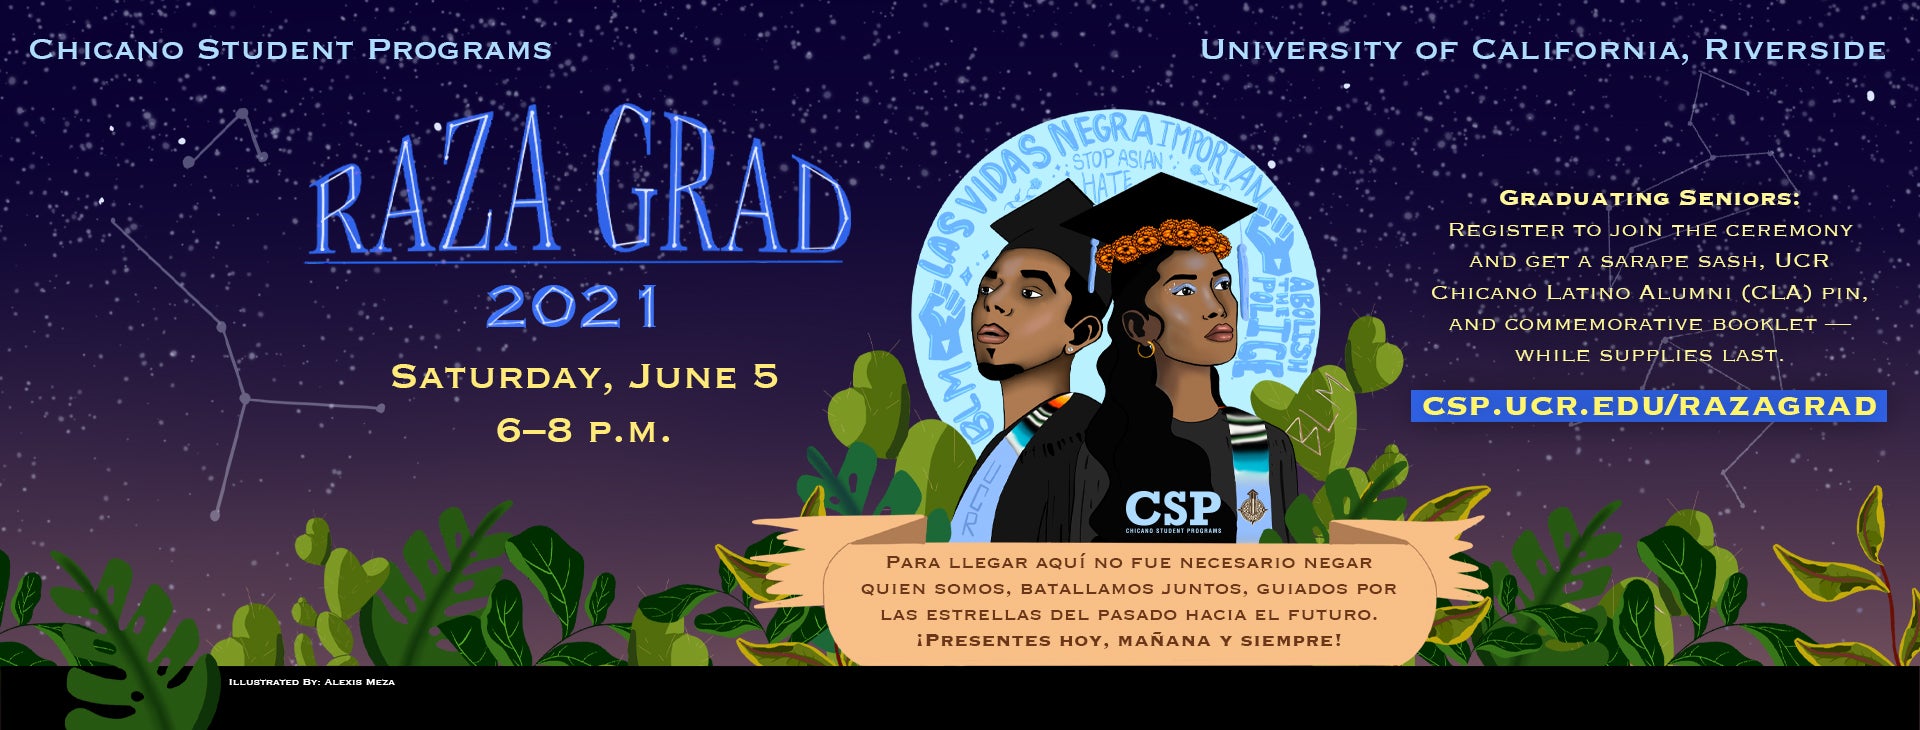 CSP celebrates Raza Grad 2021. An illustration depicts two ChicanX Scholars standing back to back at dusk in front of the moon.